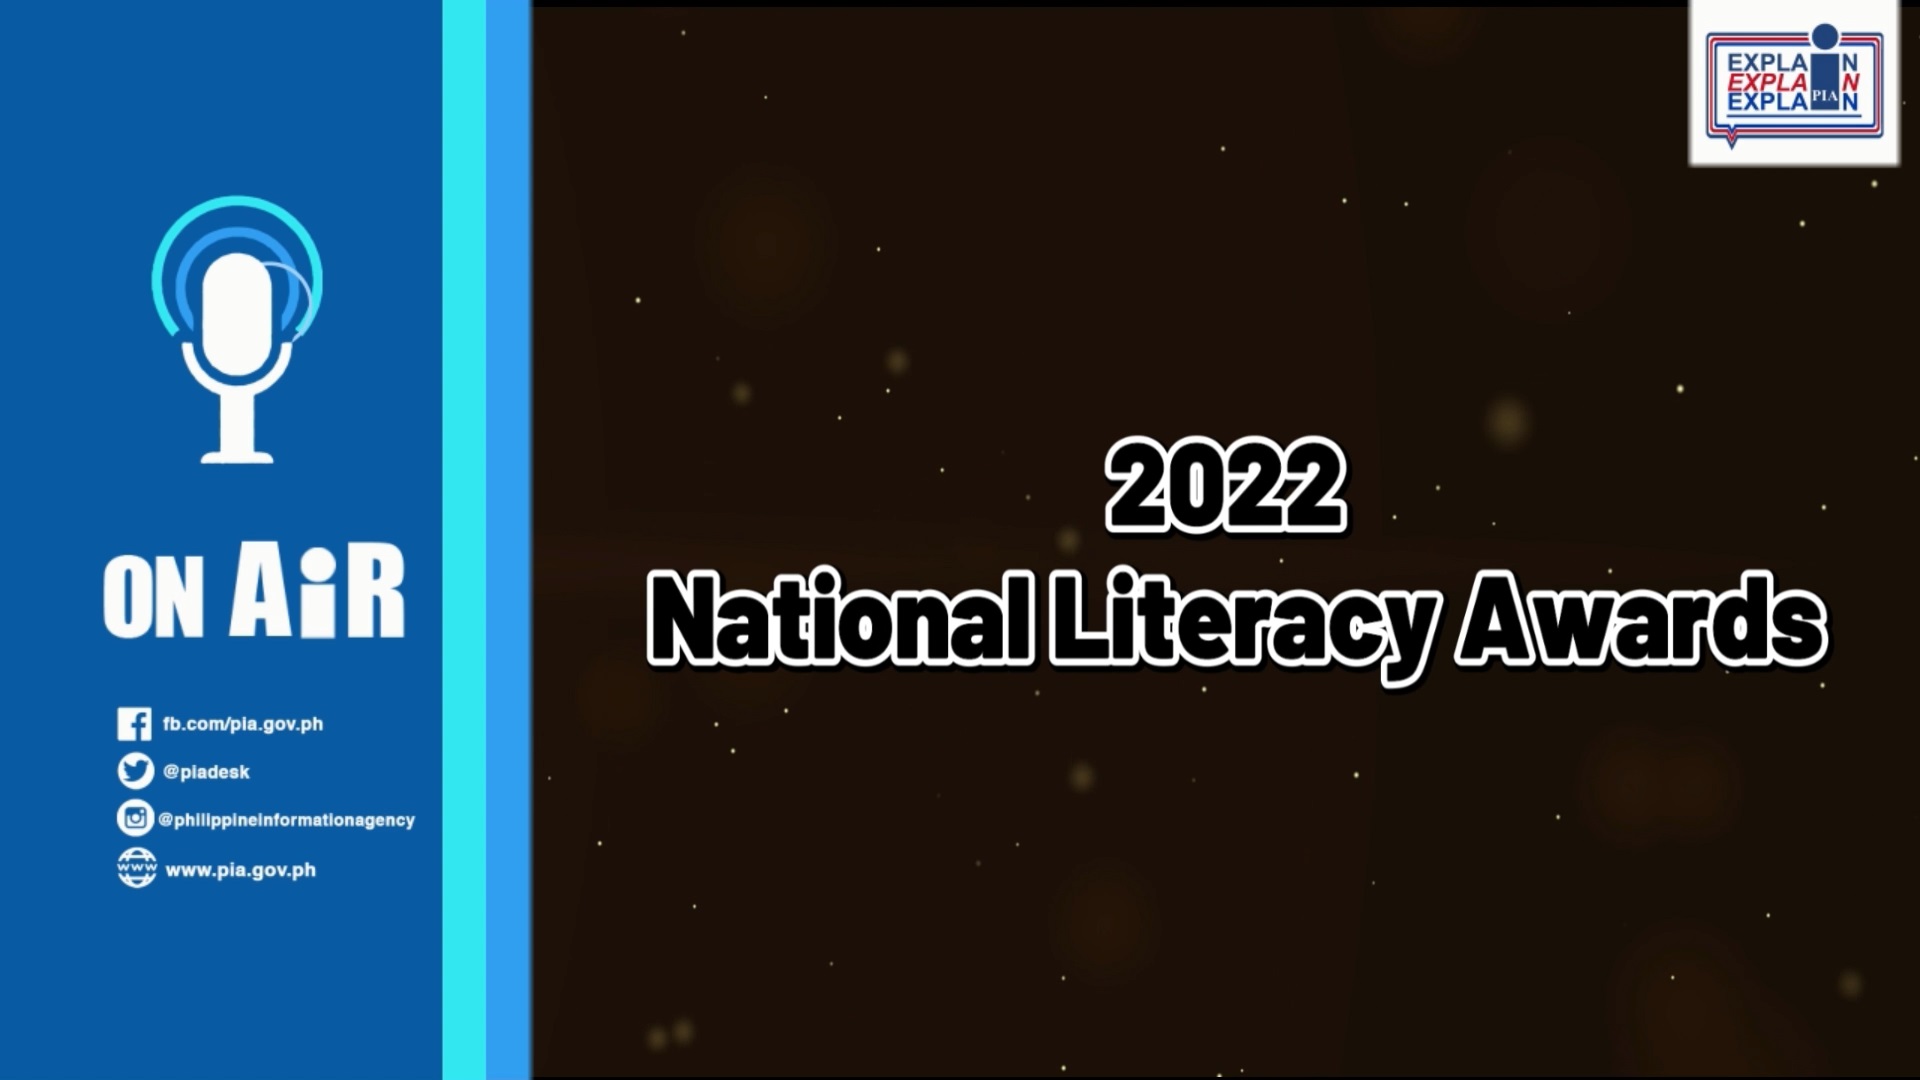 PIA ON AIR | National Literacy Awards 2022